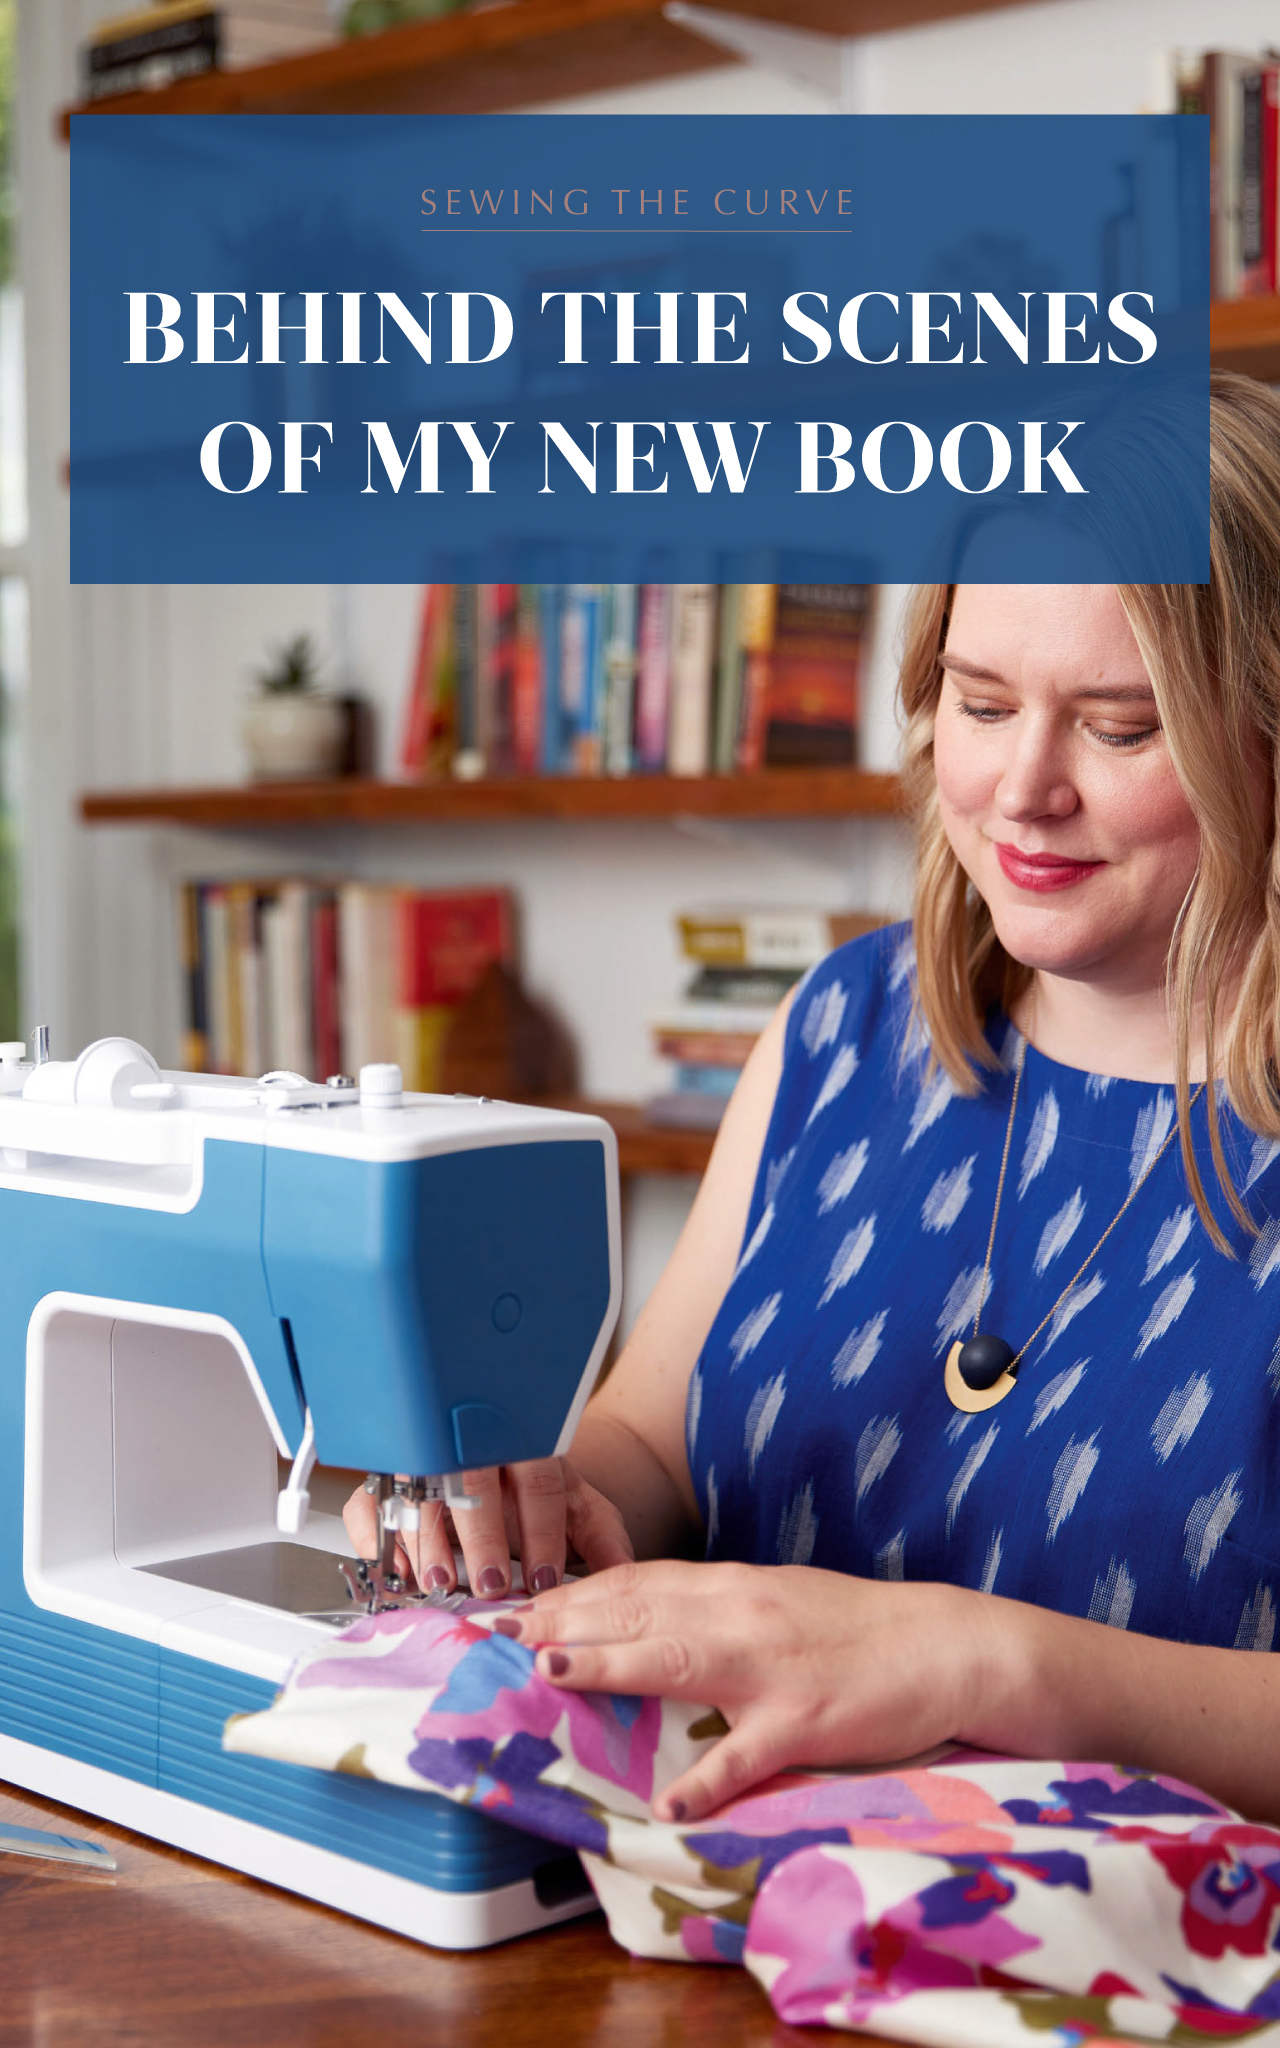 It's here! Learn to sew clothes with my new book, Sewing the Curve